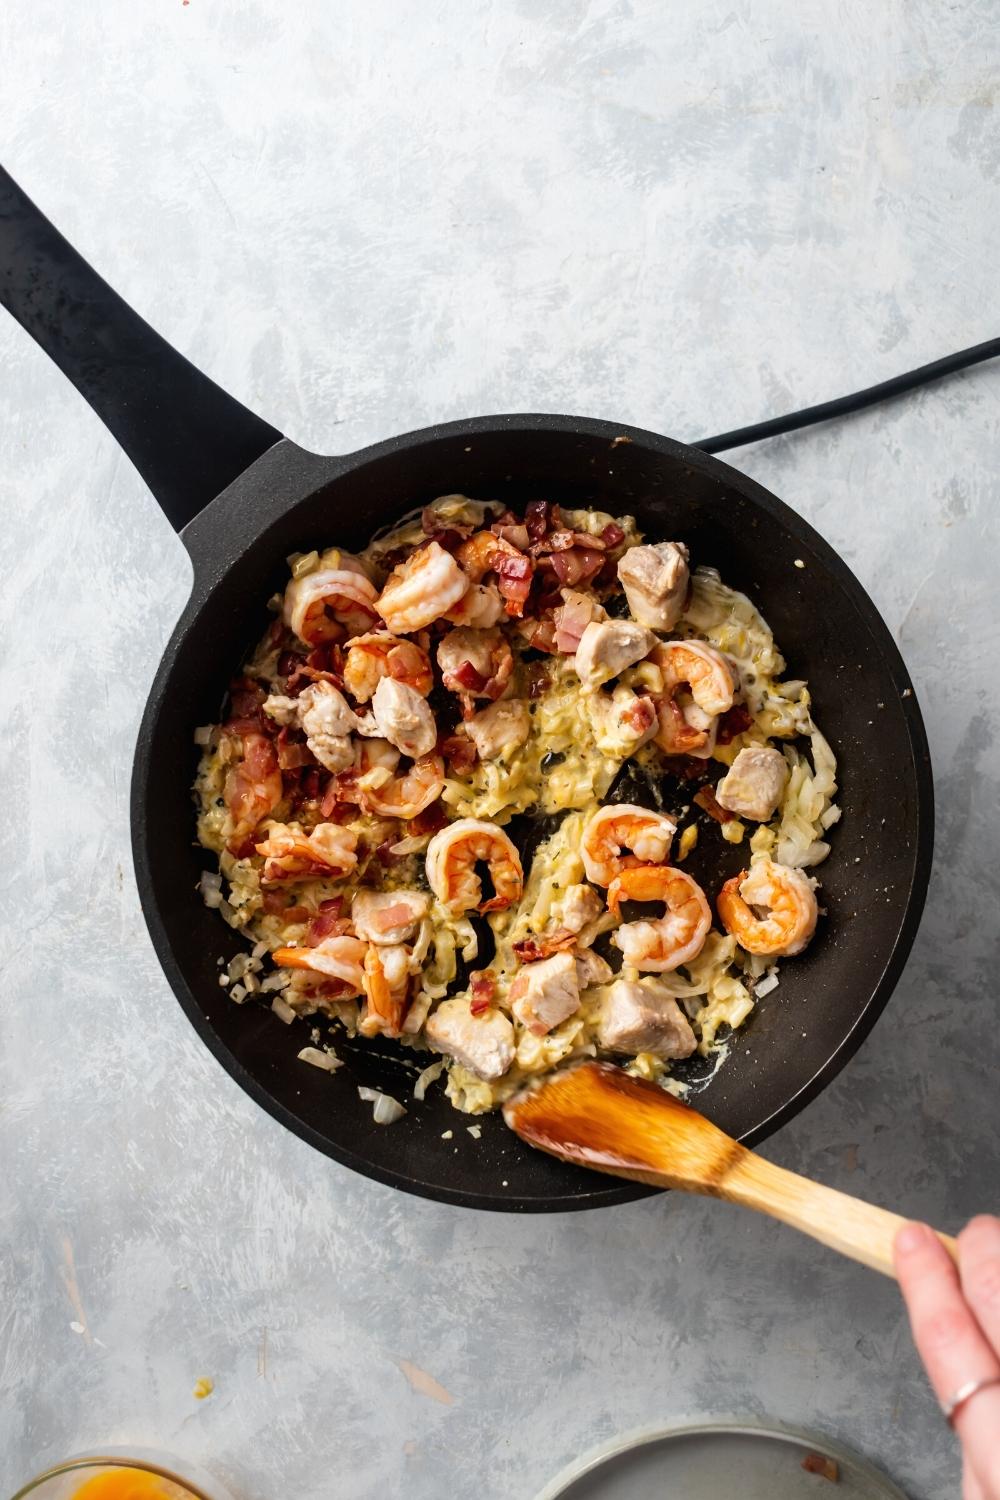 Hey skillet filled with chicken, shrimp, bacon, onion, and garlic. A wooden spoon is stirring everything around.